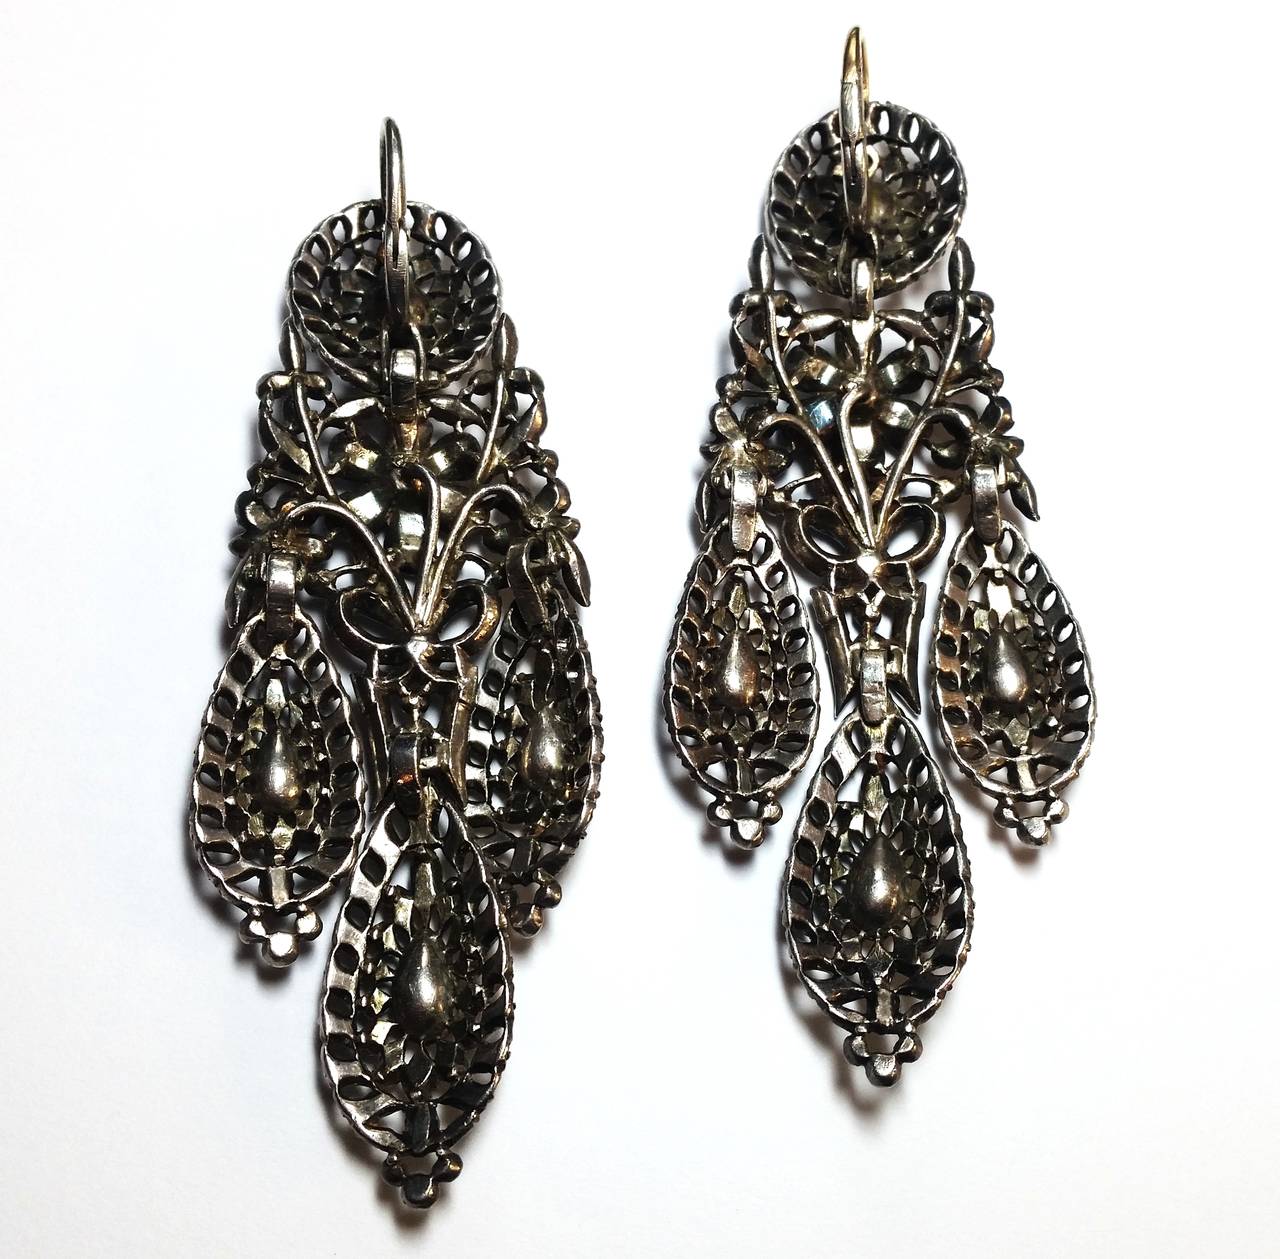 Late 18th Century Spanish or Portuguese earrings, made in silver and rose cut diamonds